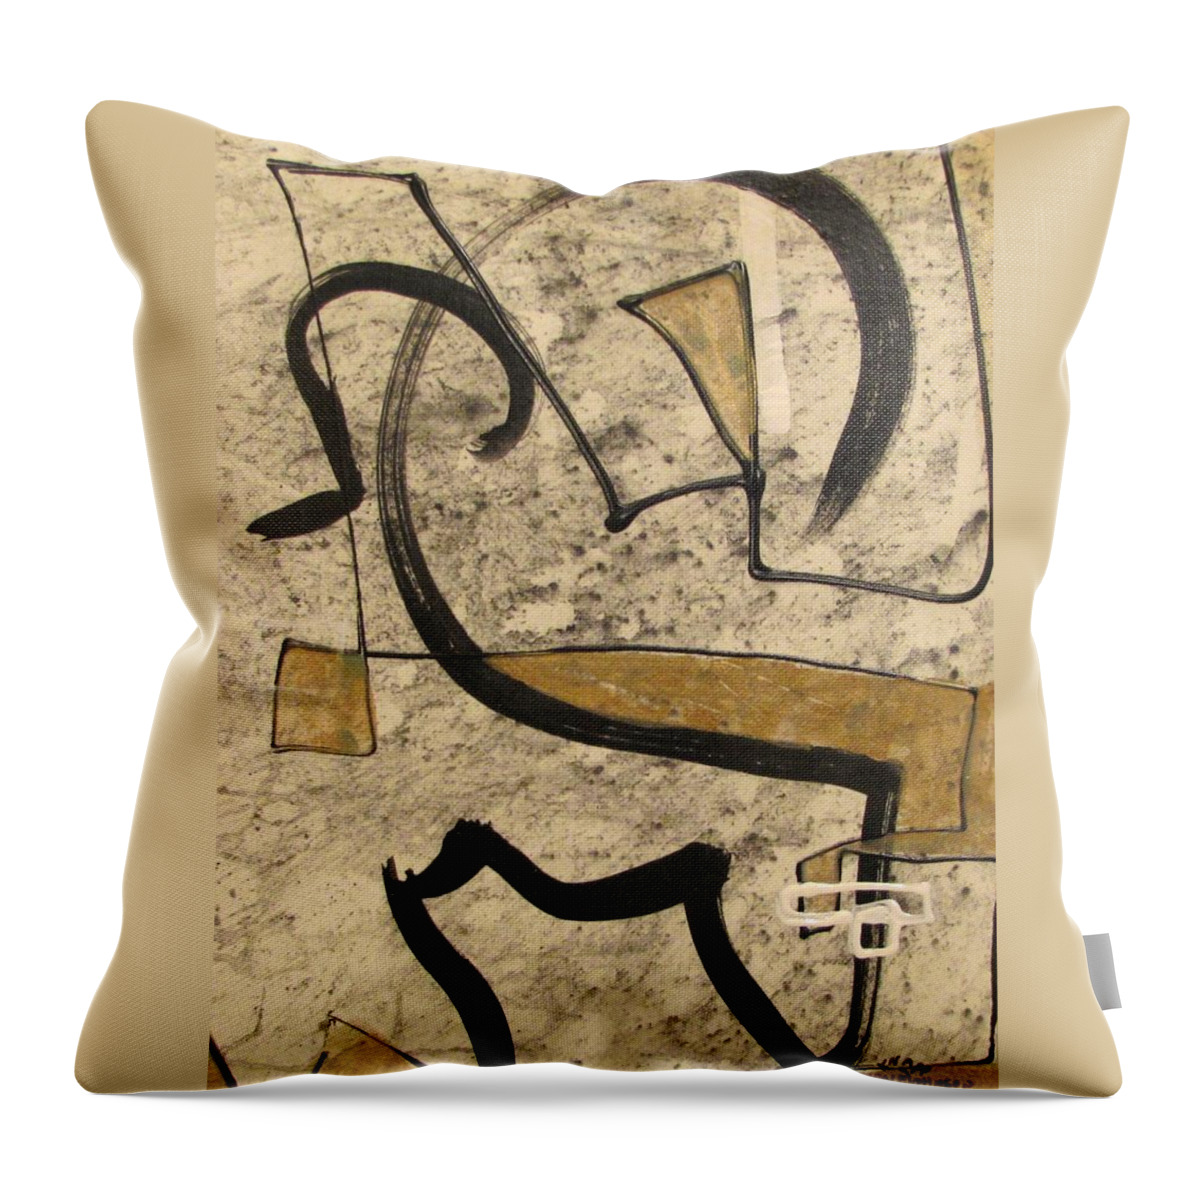 Abstract Throw Pillow featuring the painting Monarch by Carole Johnson